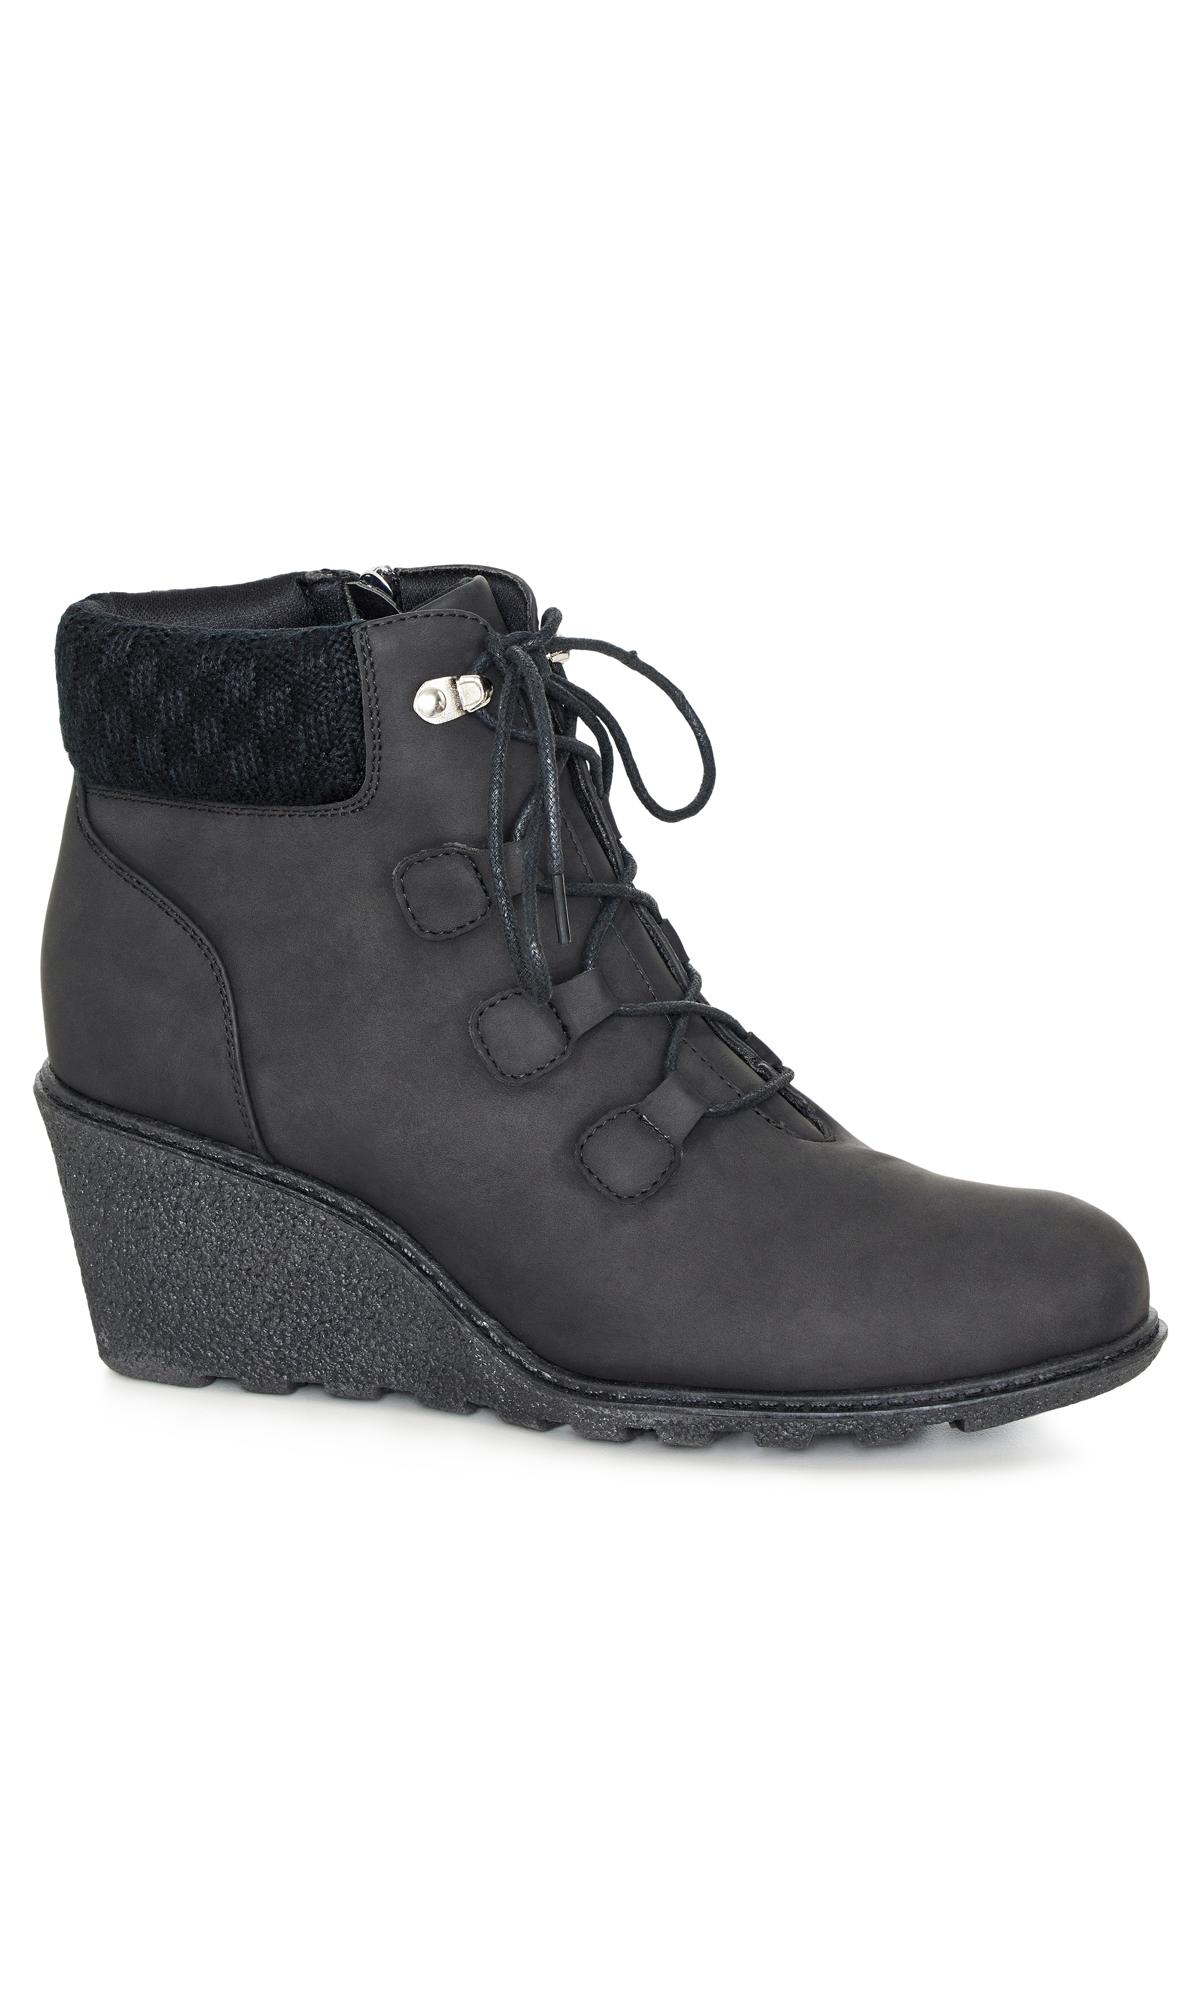 CloudWalkers Black WIDE FIT Quilted Wedge Ankle Boot 1